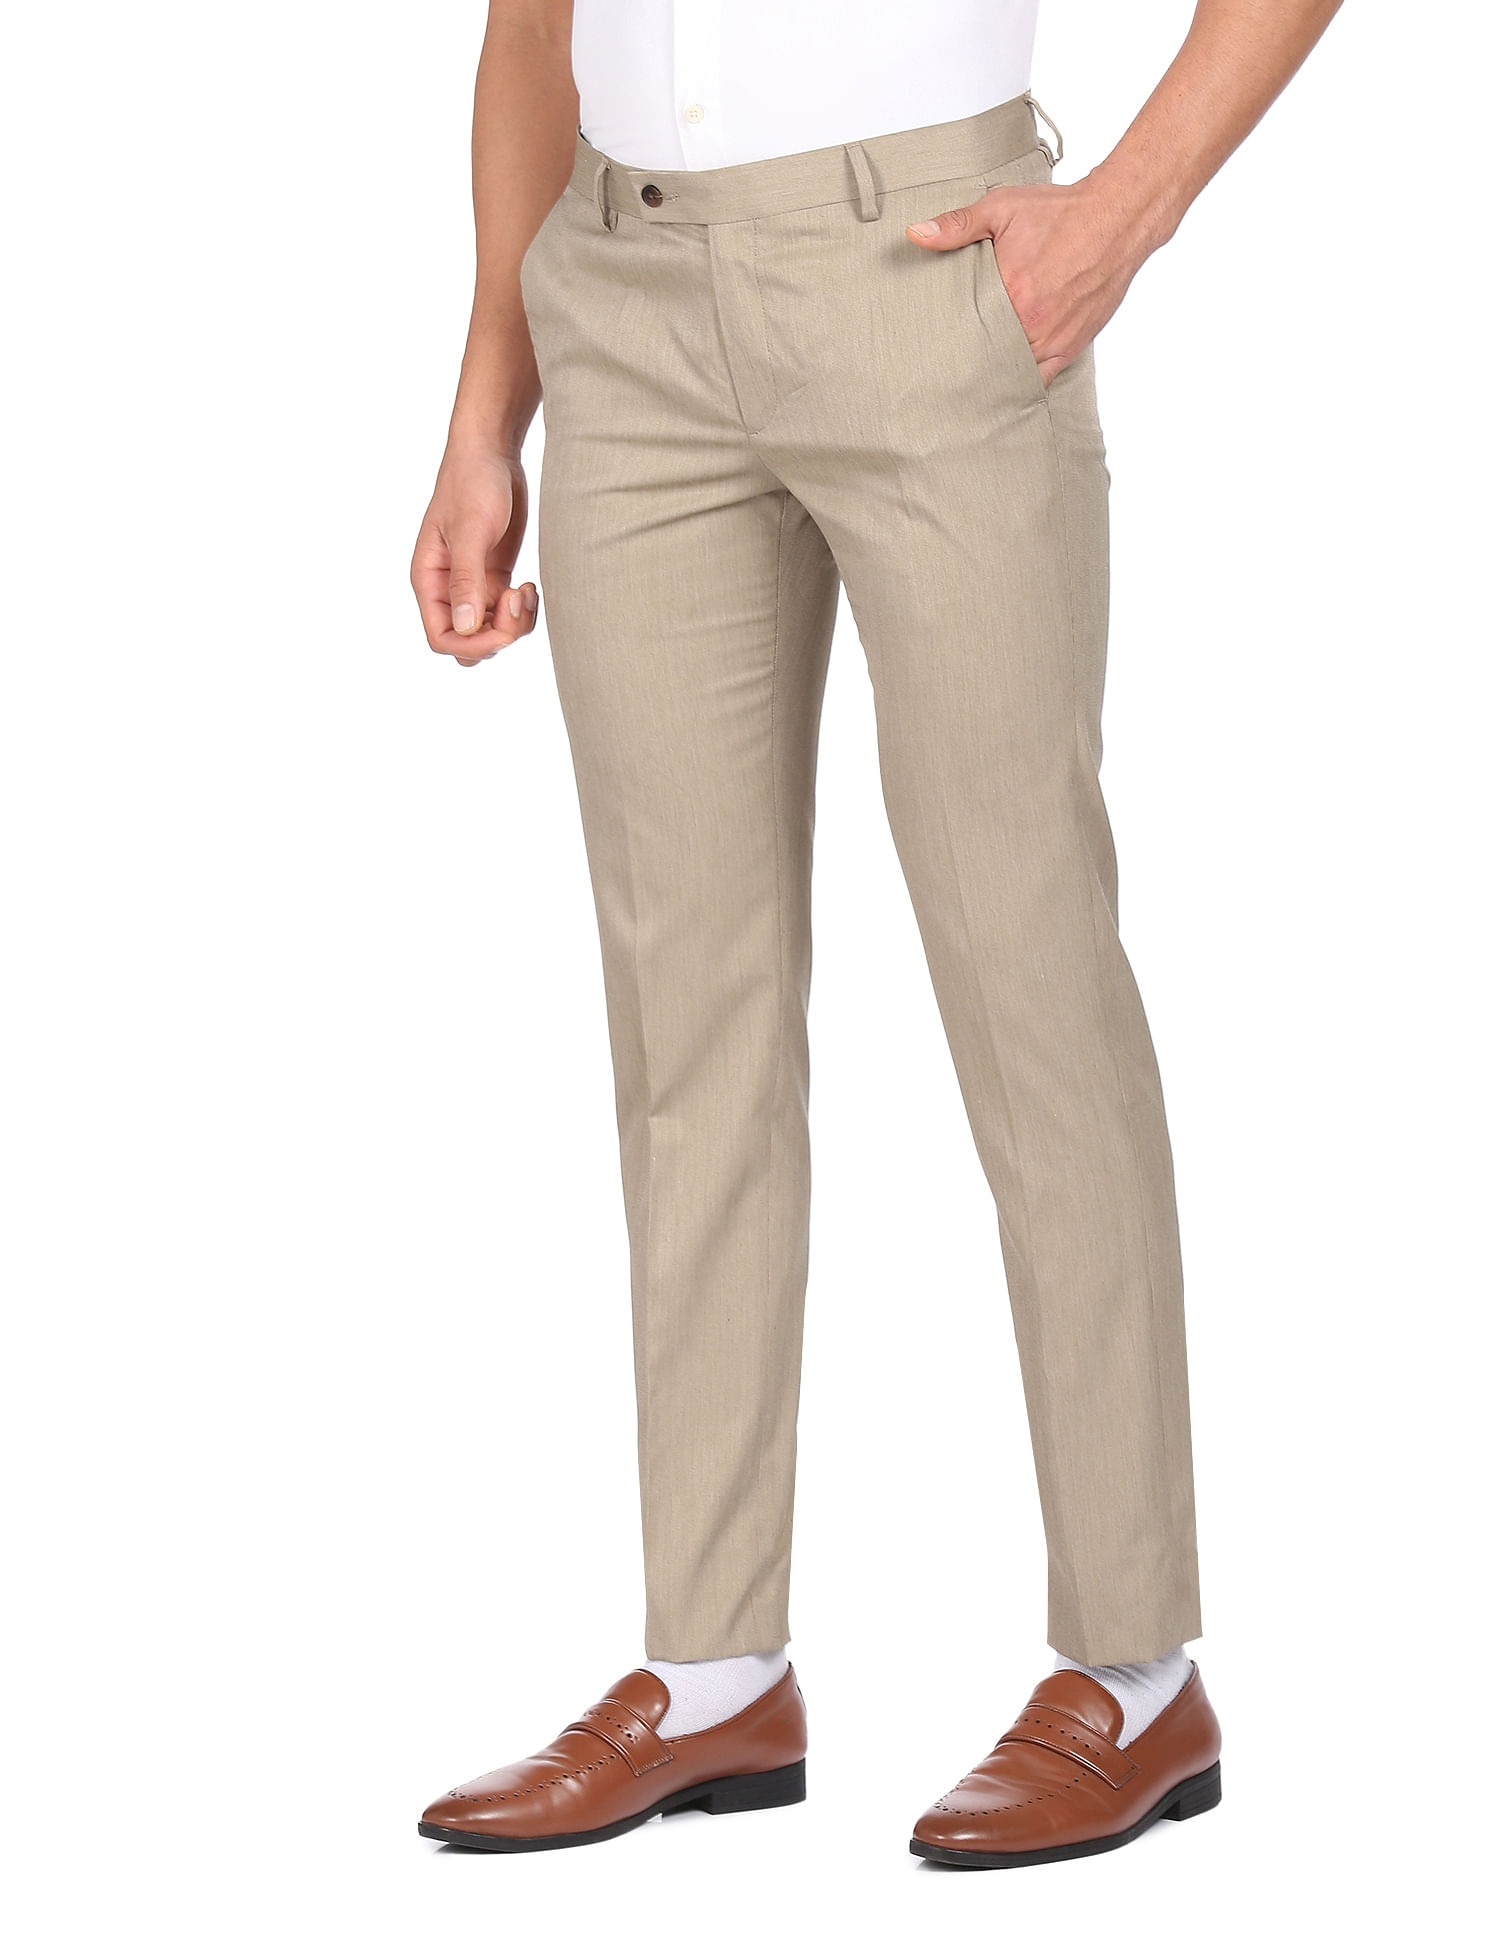 Buy BLACKBERRYS Mens Flat Front Slim Fit Solid Chinos  Shoppers Stop